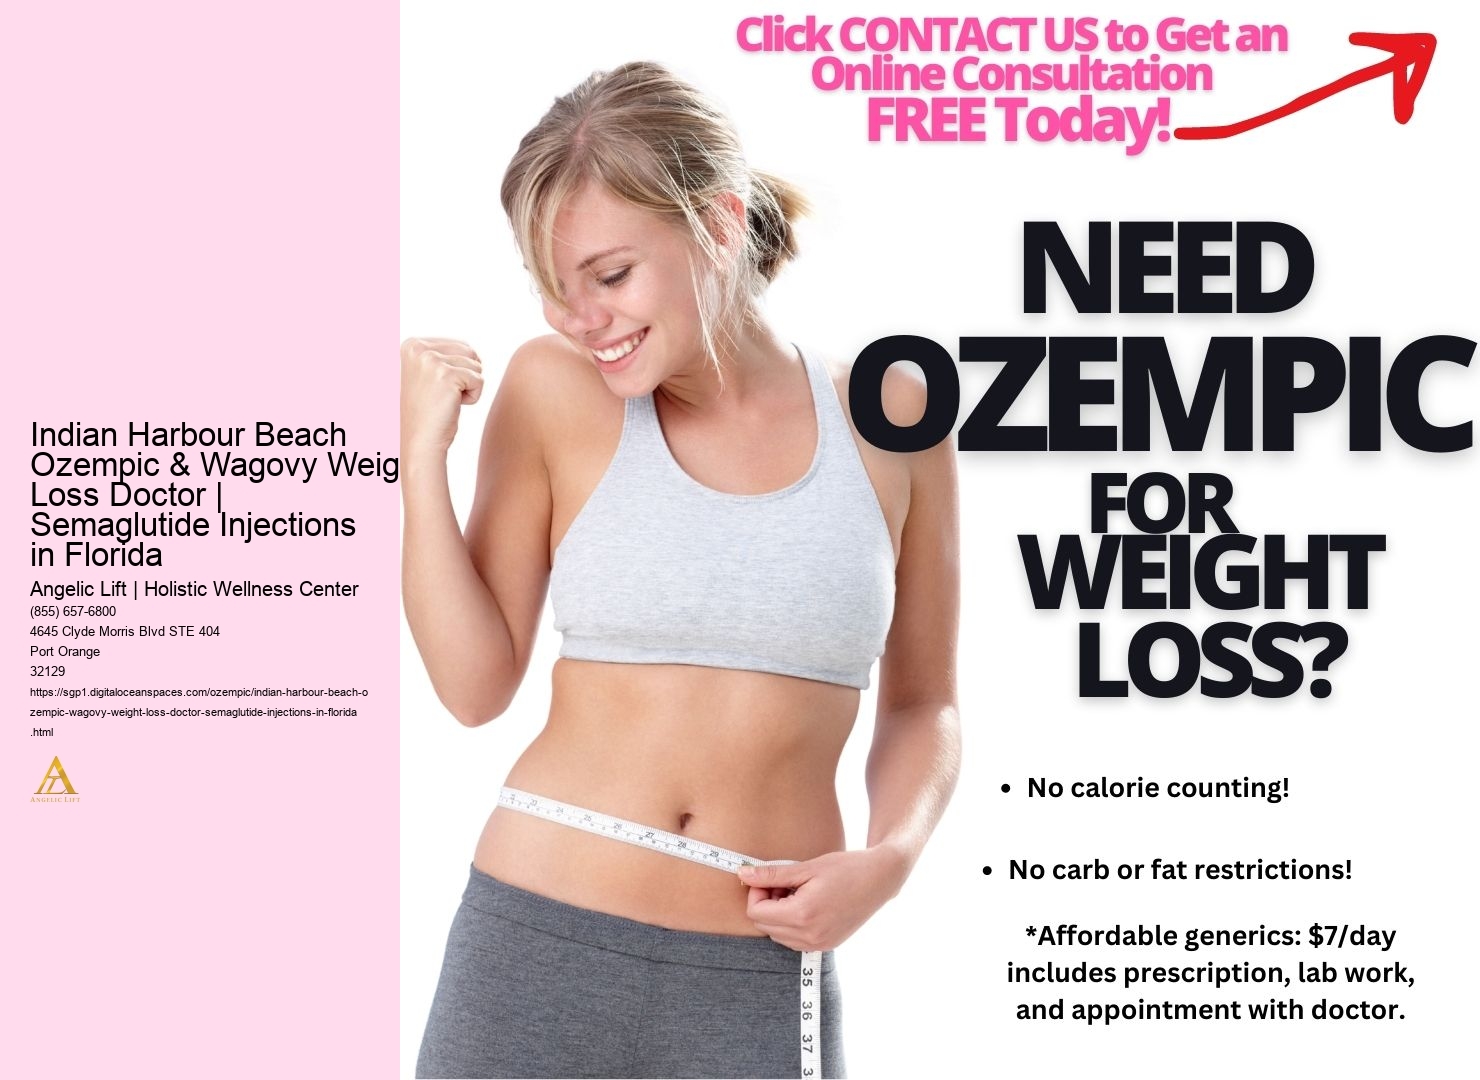 Indian Harbour Beach Ozempic & Wagovy Weight Loss Doctor | Semaglutide Injections in Florida